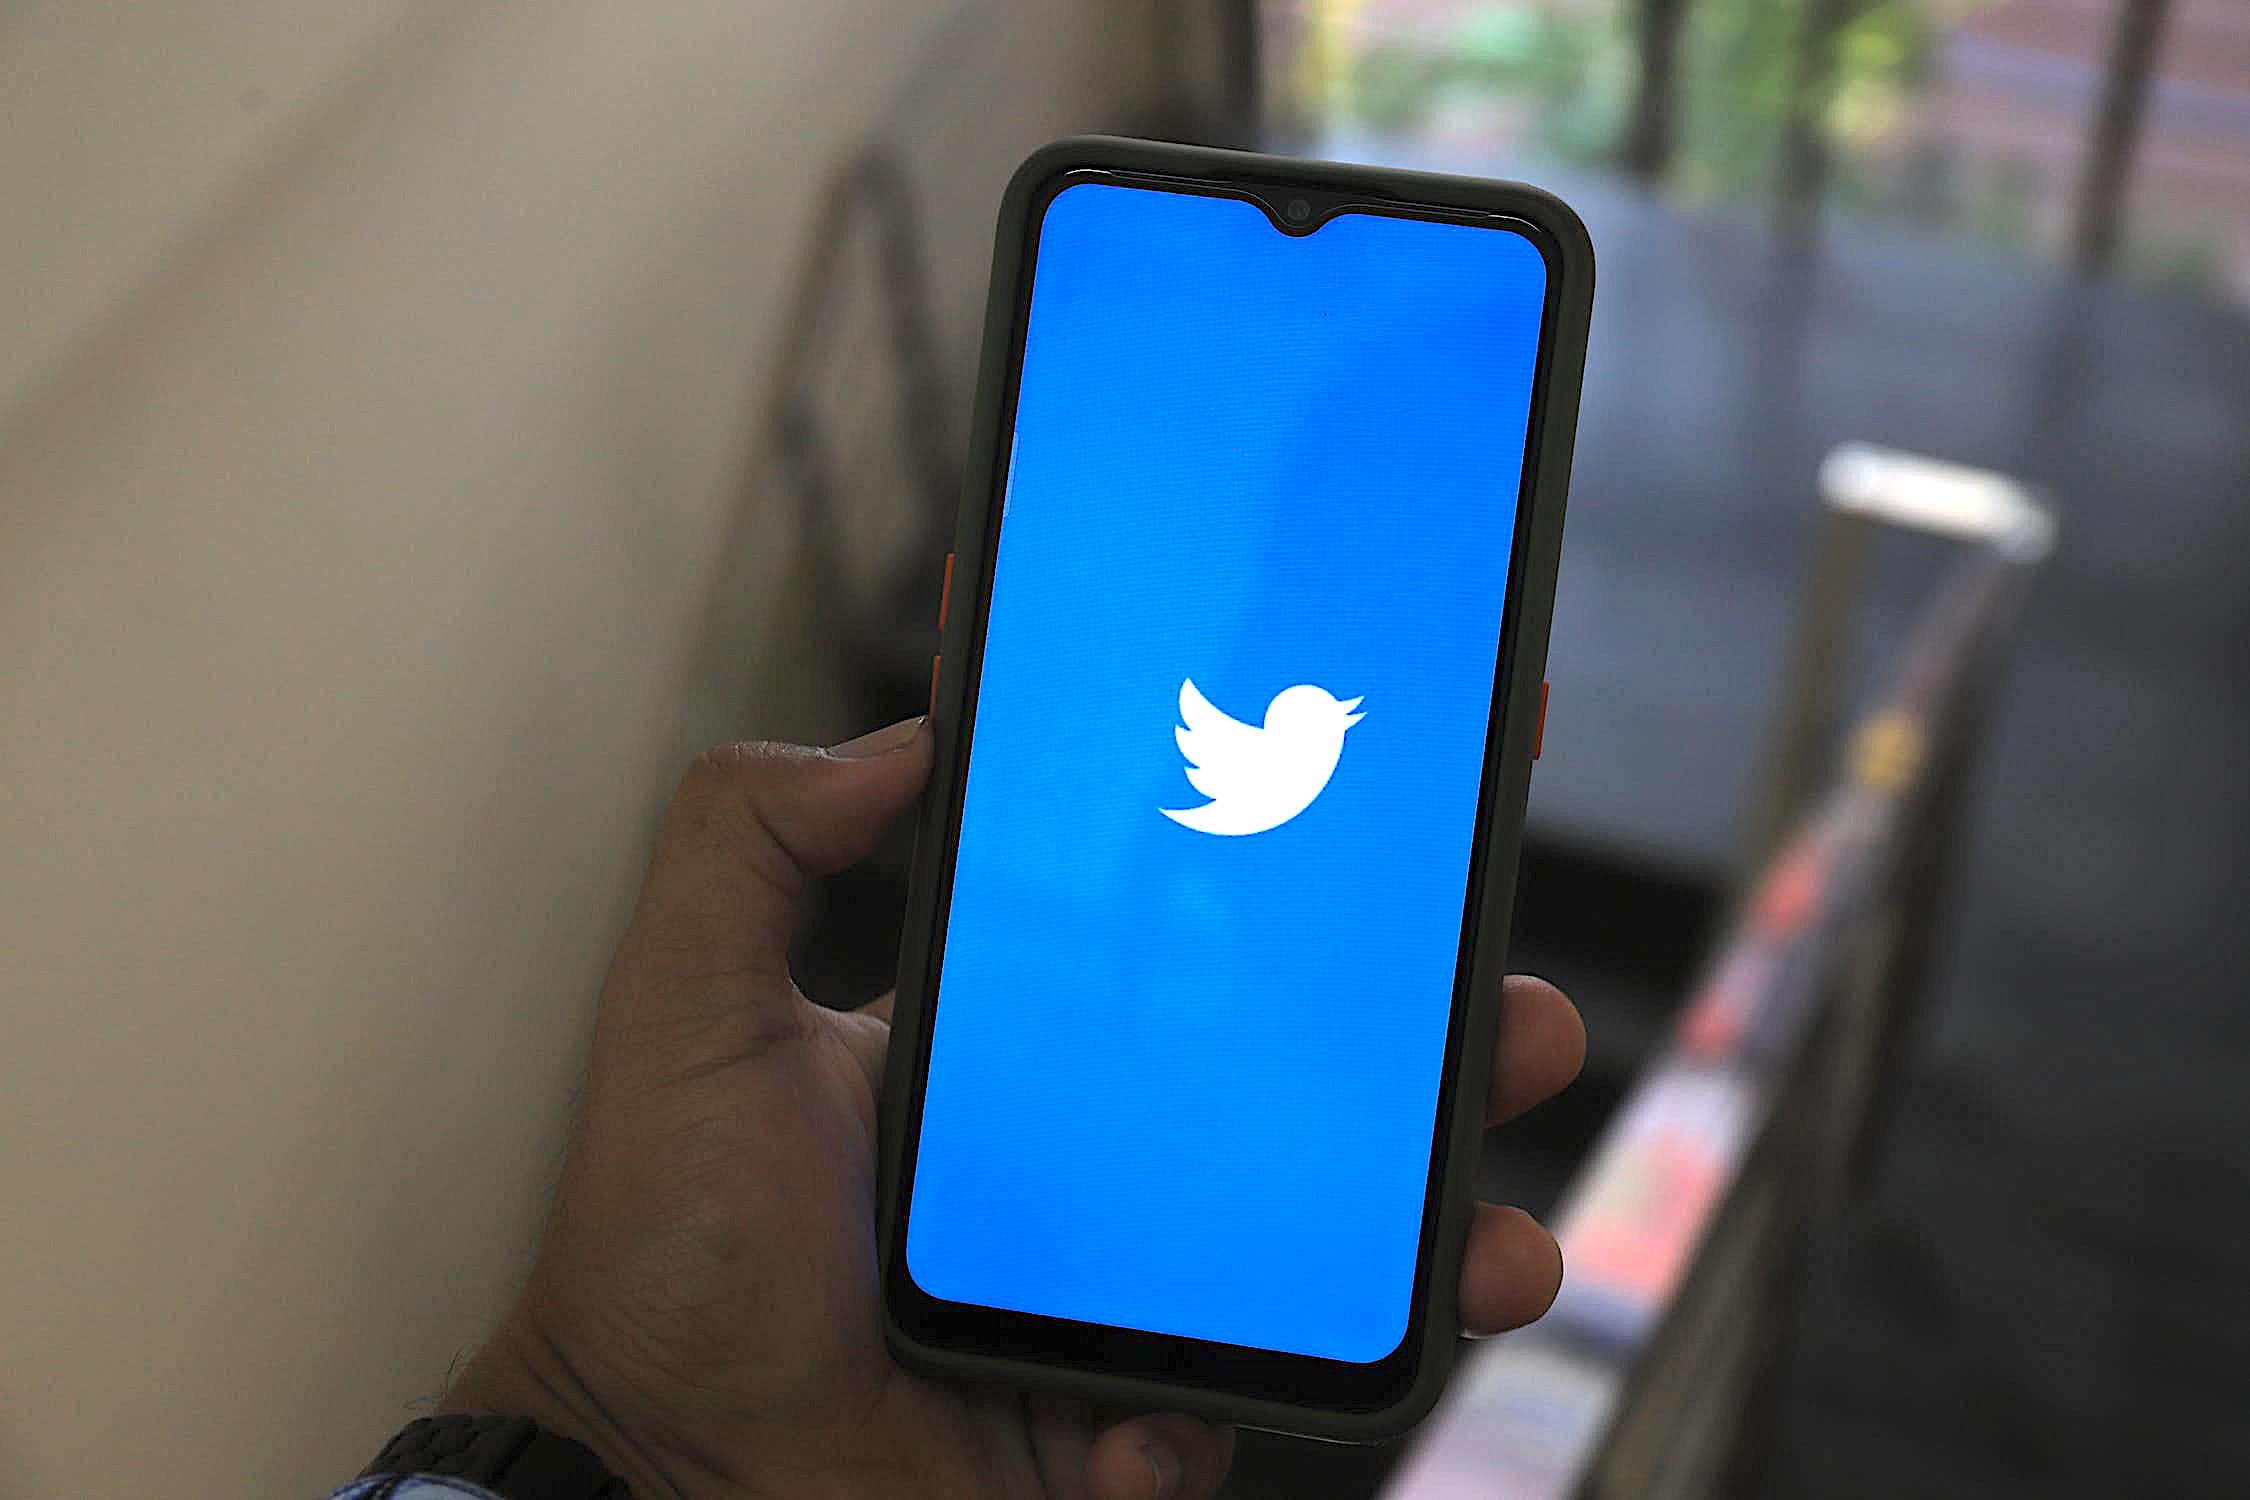 Twitter Officially Joined The Censorship Regime When It Silenced ‘Trans Day Of Vengeance’ Reporting